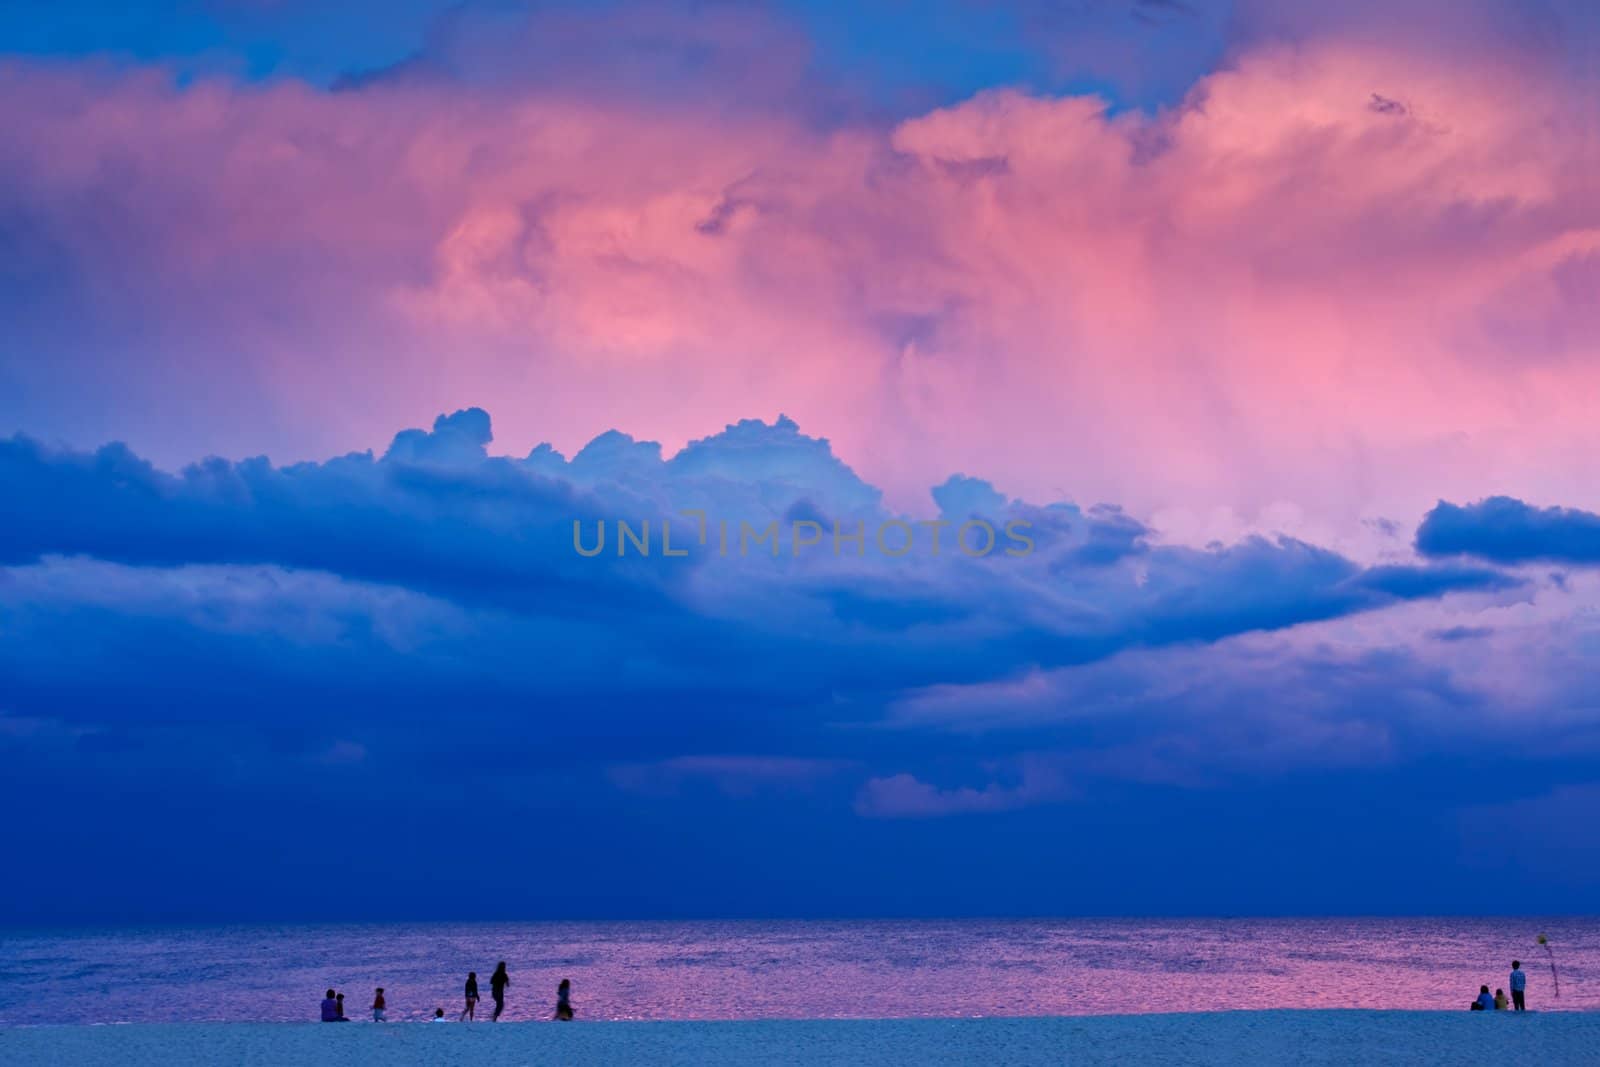 A beach scene in the evening at sunset. There are people on the beach with a dramatic stormy sky overhead. The last rays of sunlight are lighting some of the clouds.